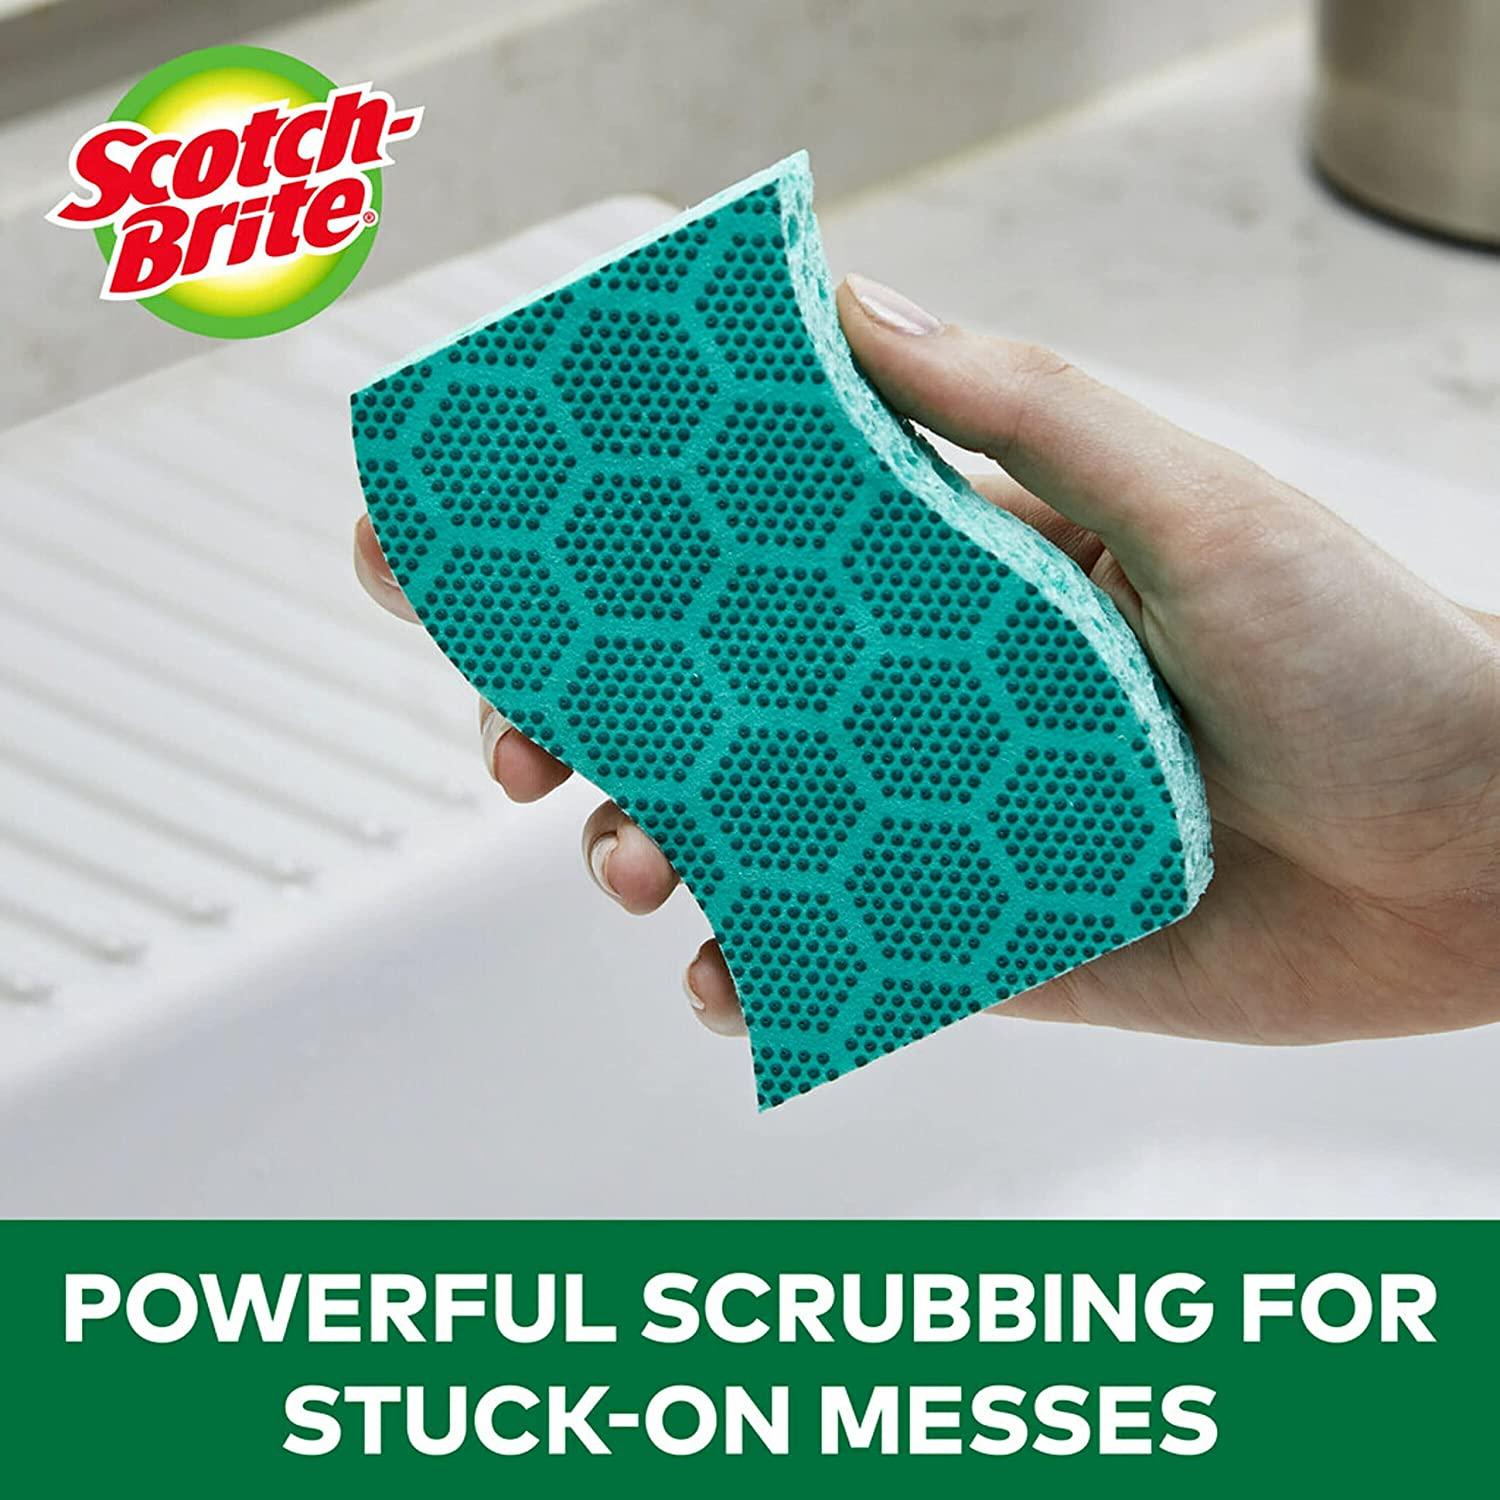 Scotch-Brite Heavy Duty Scrub Sponges, For Washing Dishes and